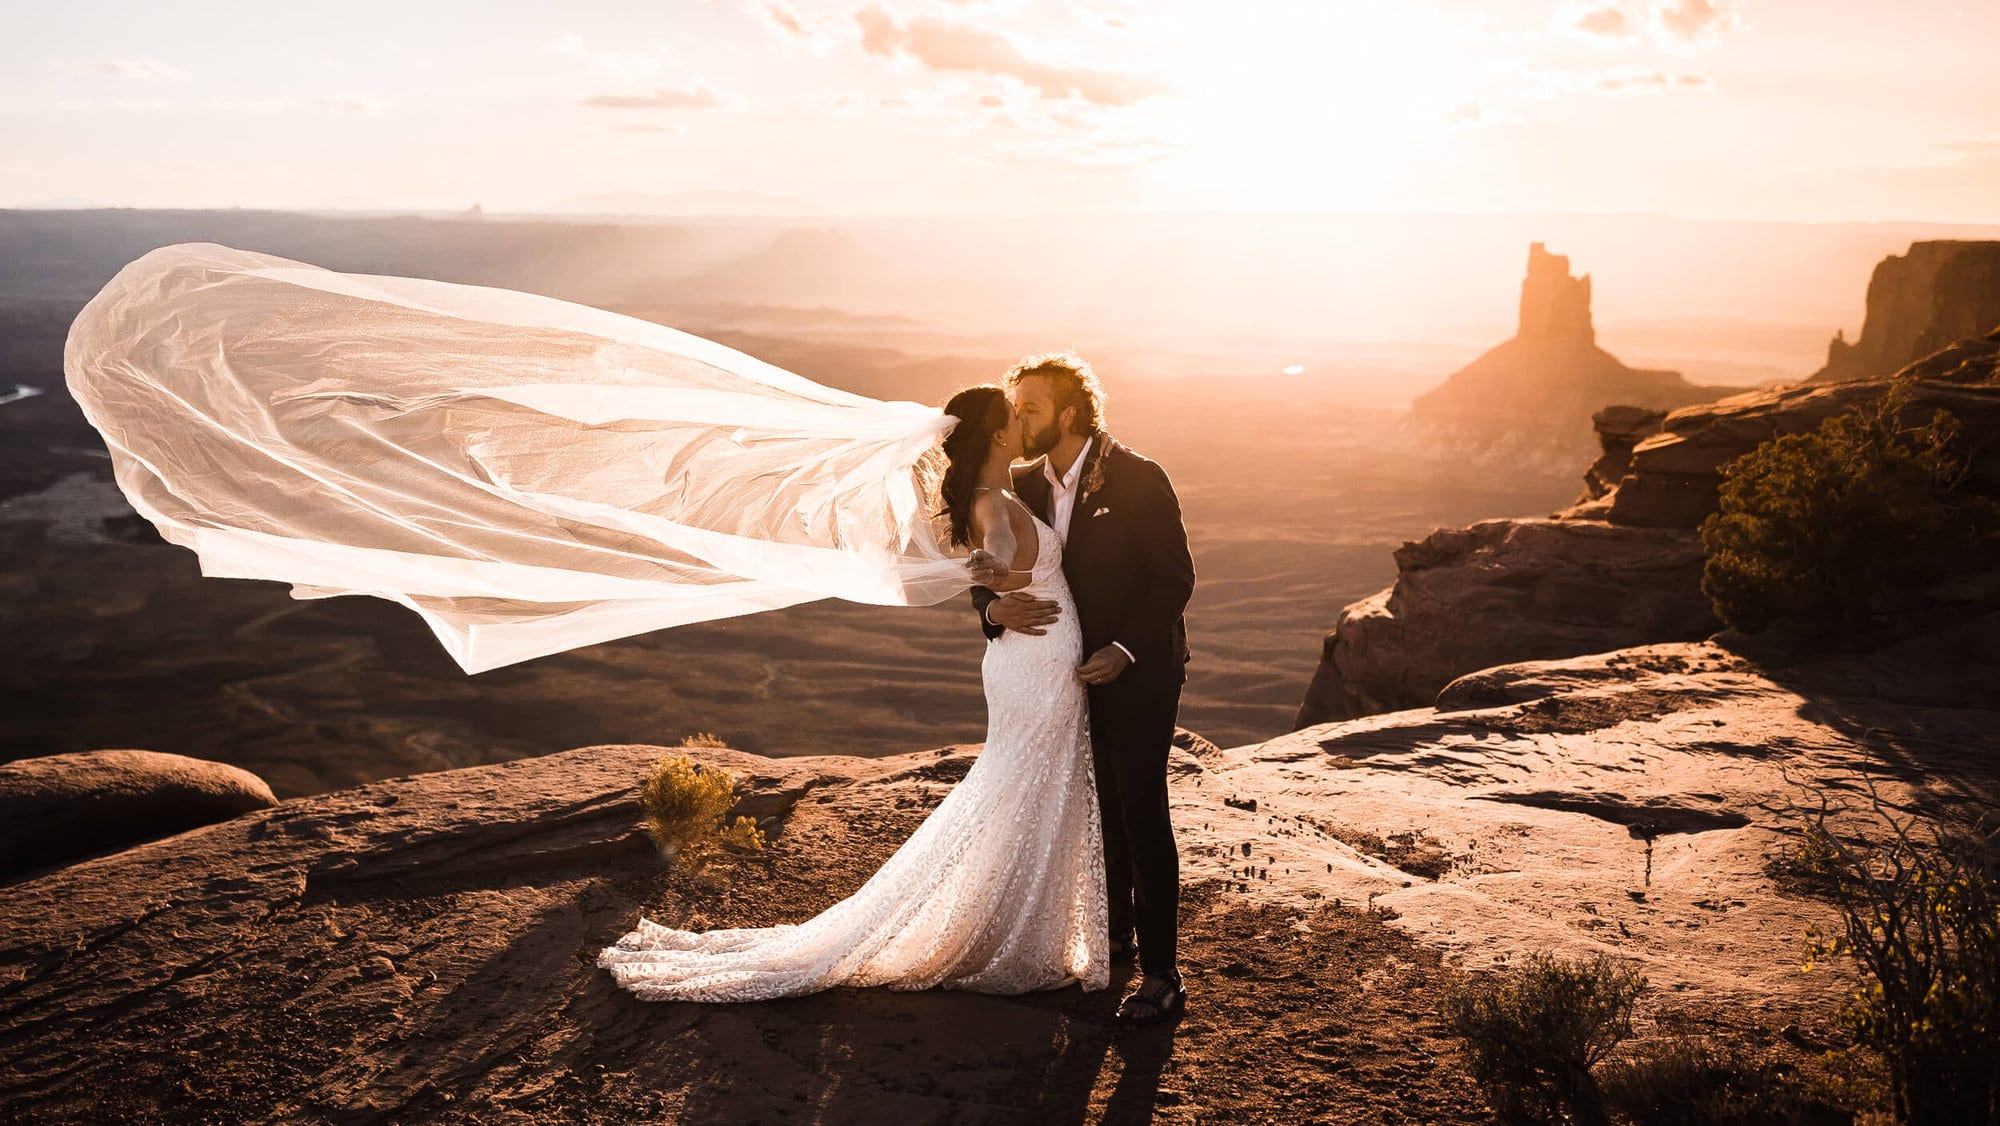 https://aimeeflynnphoto.com/wp-content/uploads/2022/12/places-to-elope-in-utah-aimee-flynn-photo-15.jpg